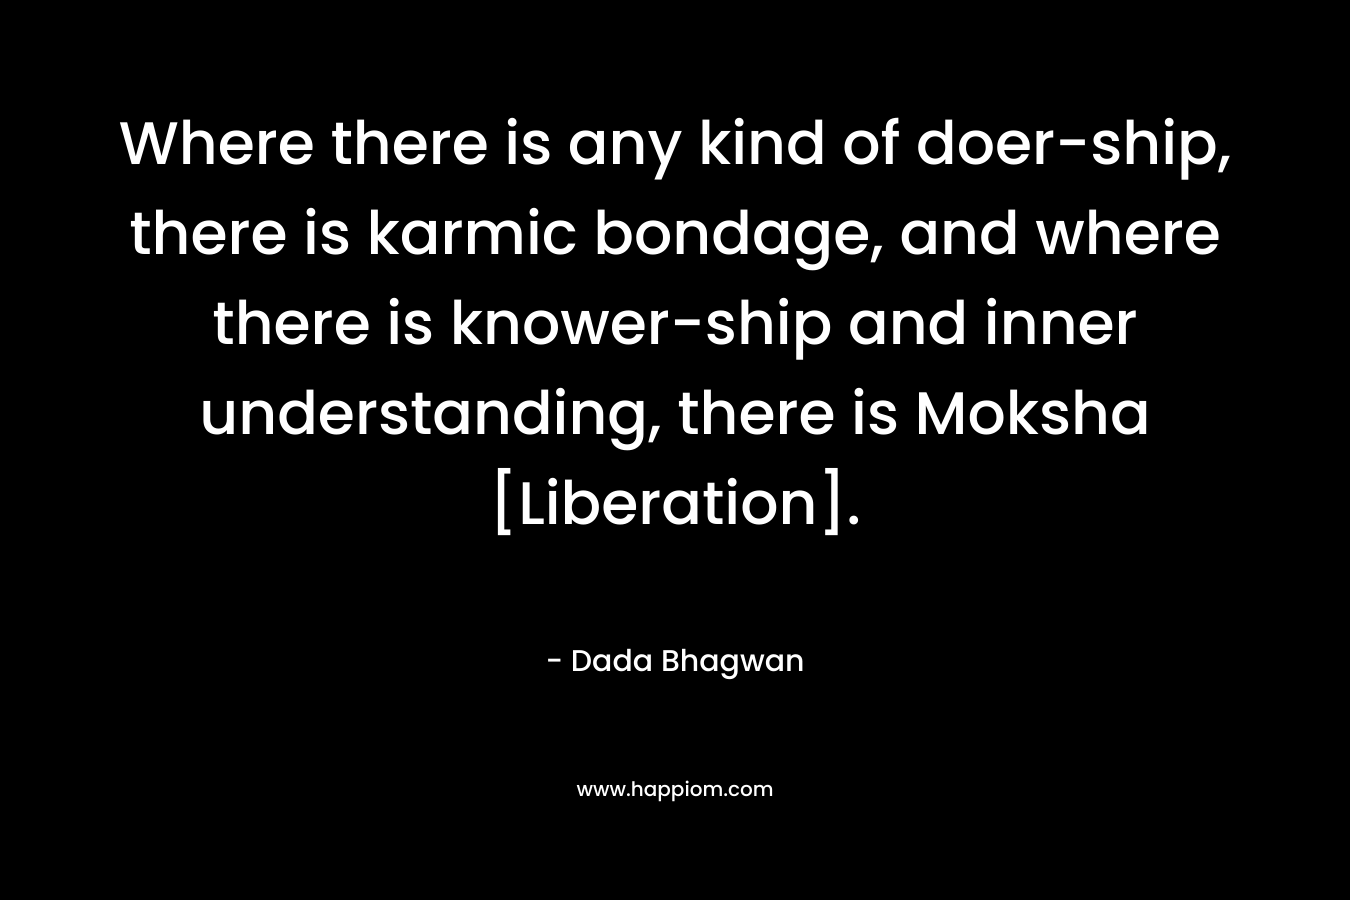 Where there is any kind of doer-ship, there is karmic bondage, and where there is knower-ship and inner understanding, there is Moksha [Liberation].